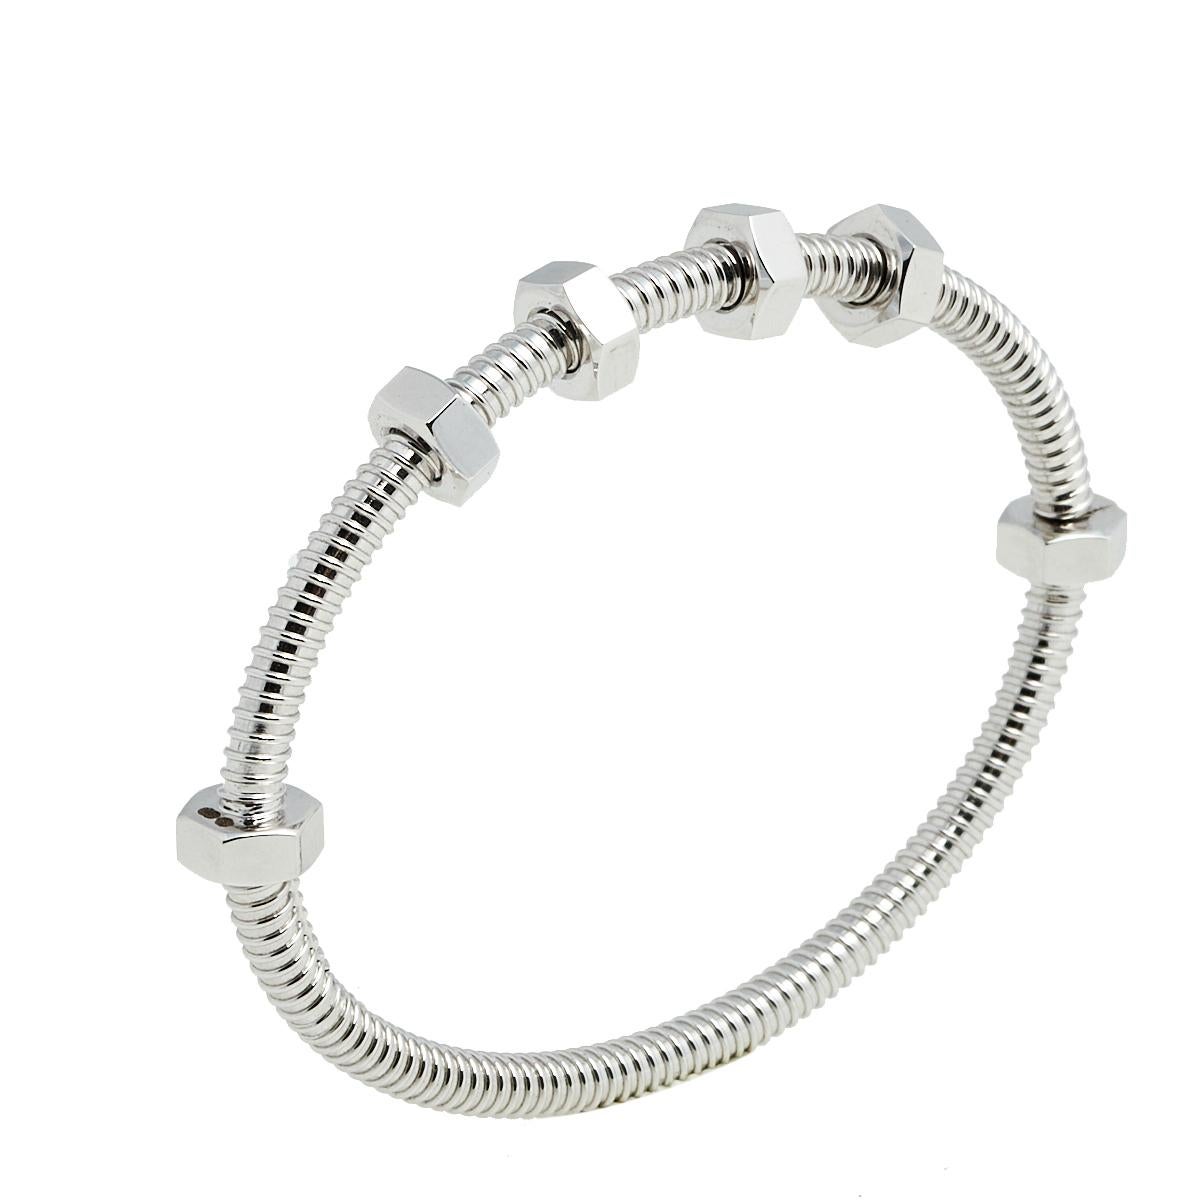 Cartier continues to explore the hardware theme with the Ecrou De Cartier line. Made from 18k white gold, this Cartier bracelet has a nut and bolt style for a statement-making look. It also offers a comfortable fit.

Includes: Original Box, Original